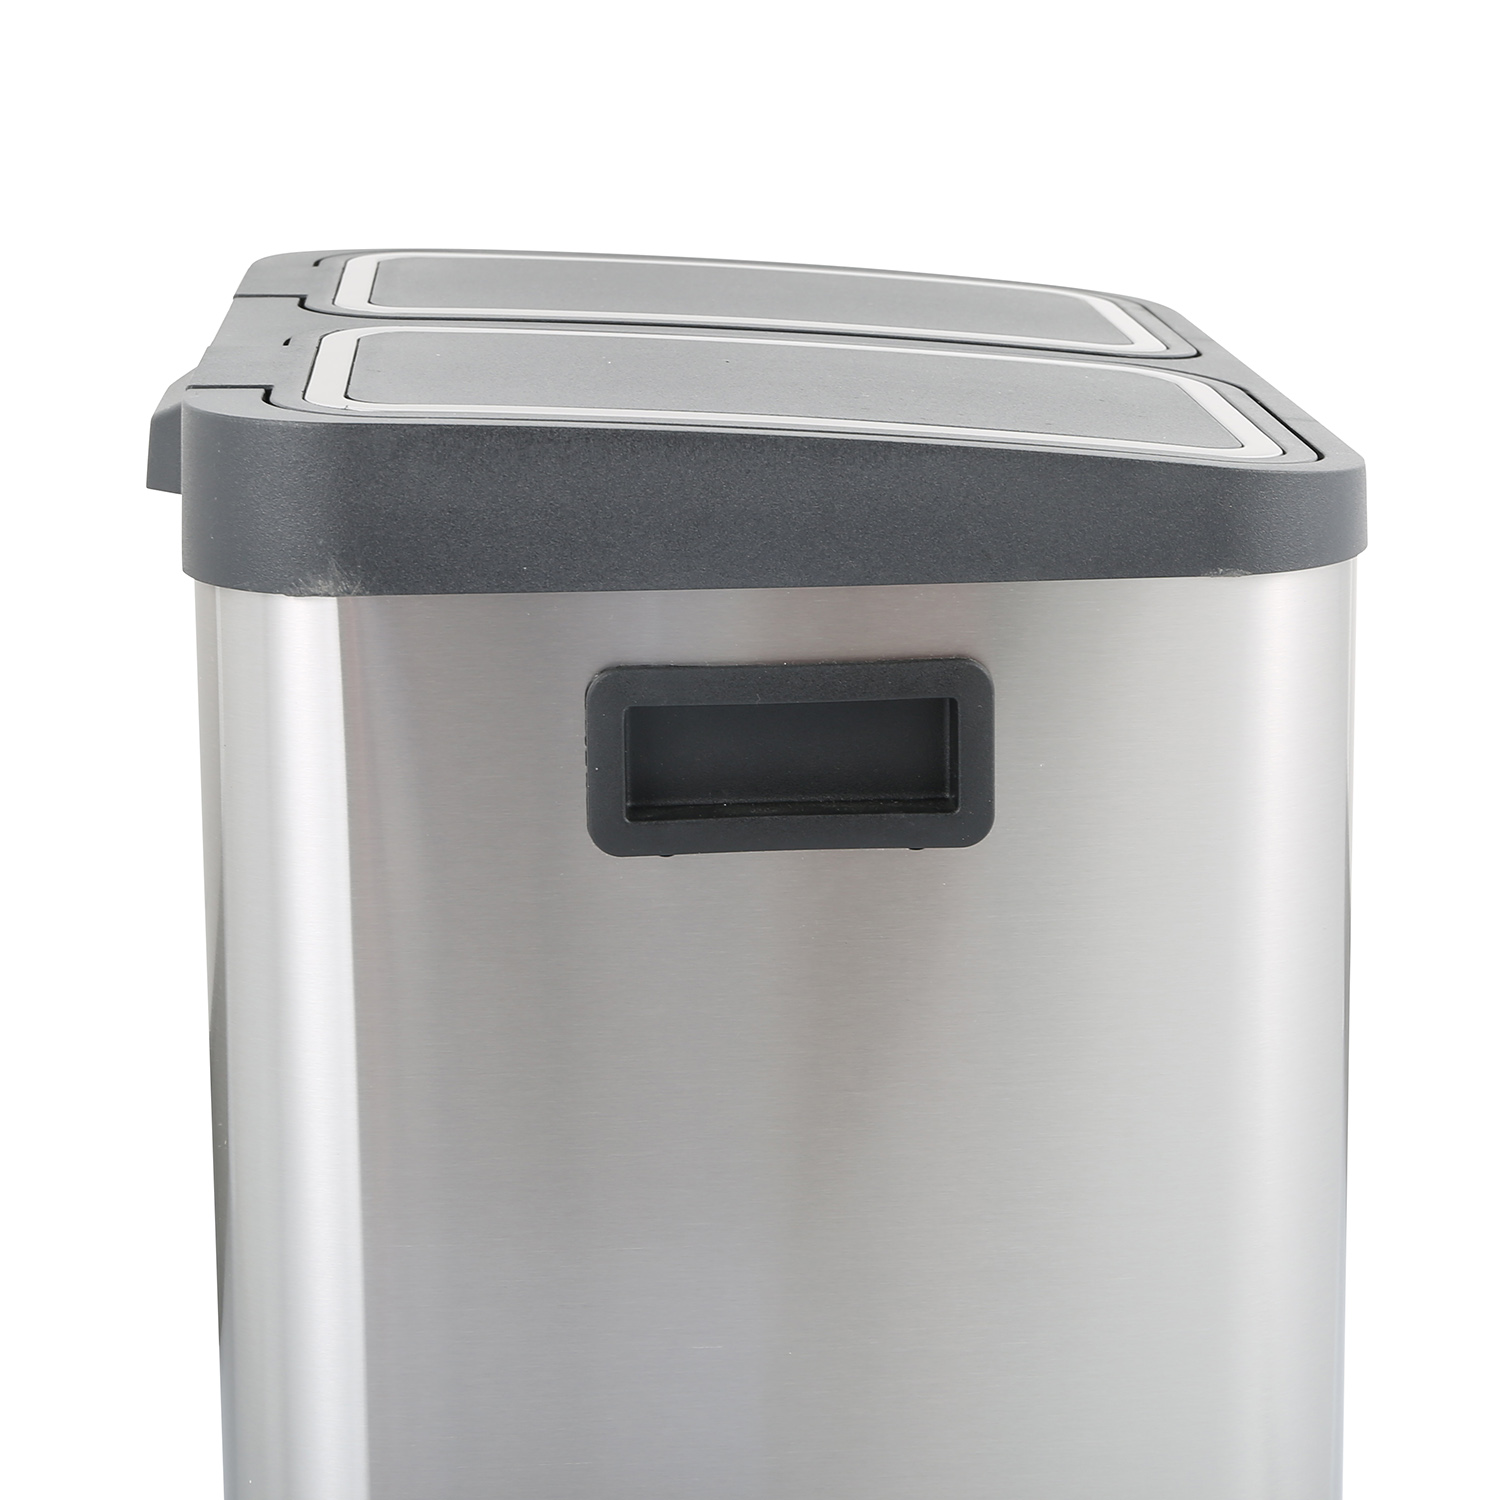 Dual Compartment Stainless Steel Recycle Garbage Bin 15L+15L (KL-105)